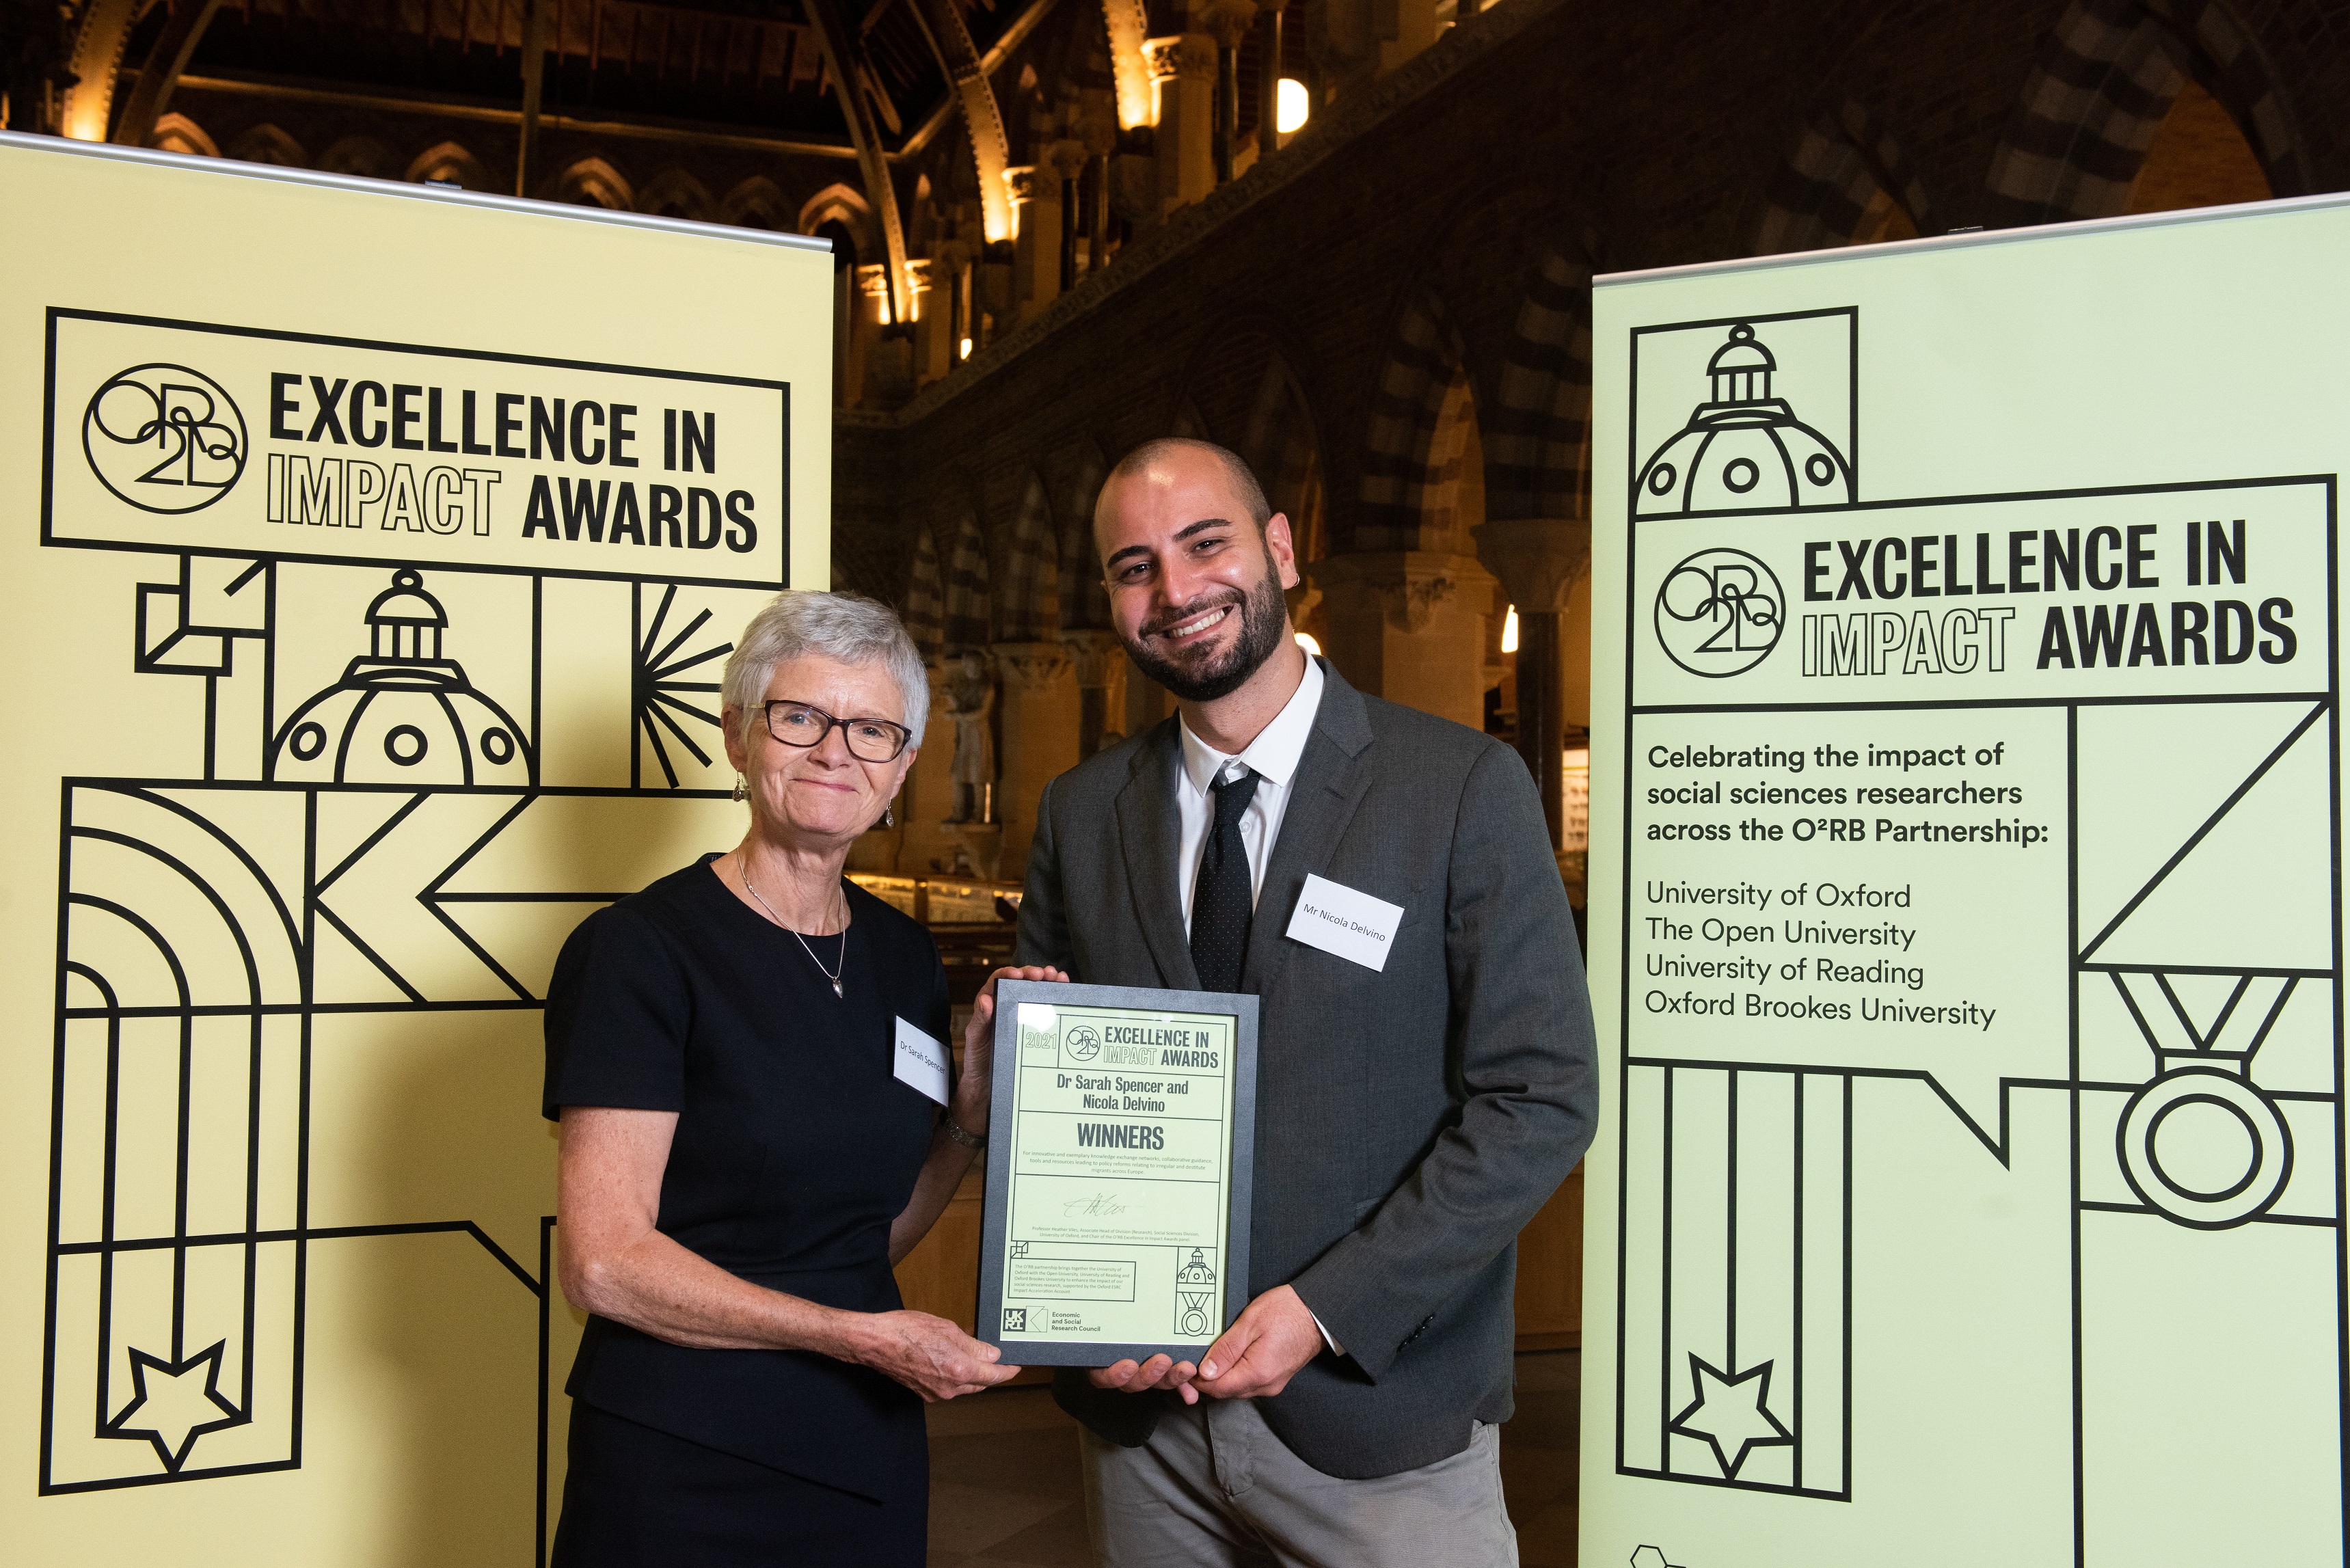  Dr Sarah Spencer and Mr Nicola Delvino smile as they hold their Impact Awards winners certificate, in front of the O2RB Excellence in Impact Awards event branding